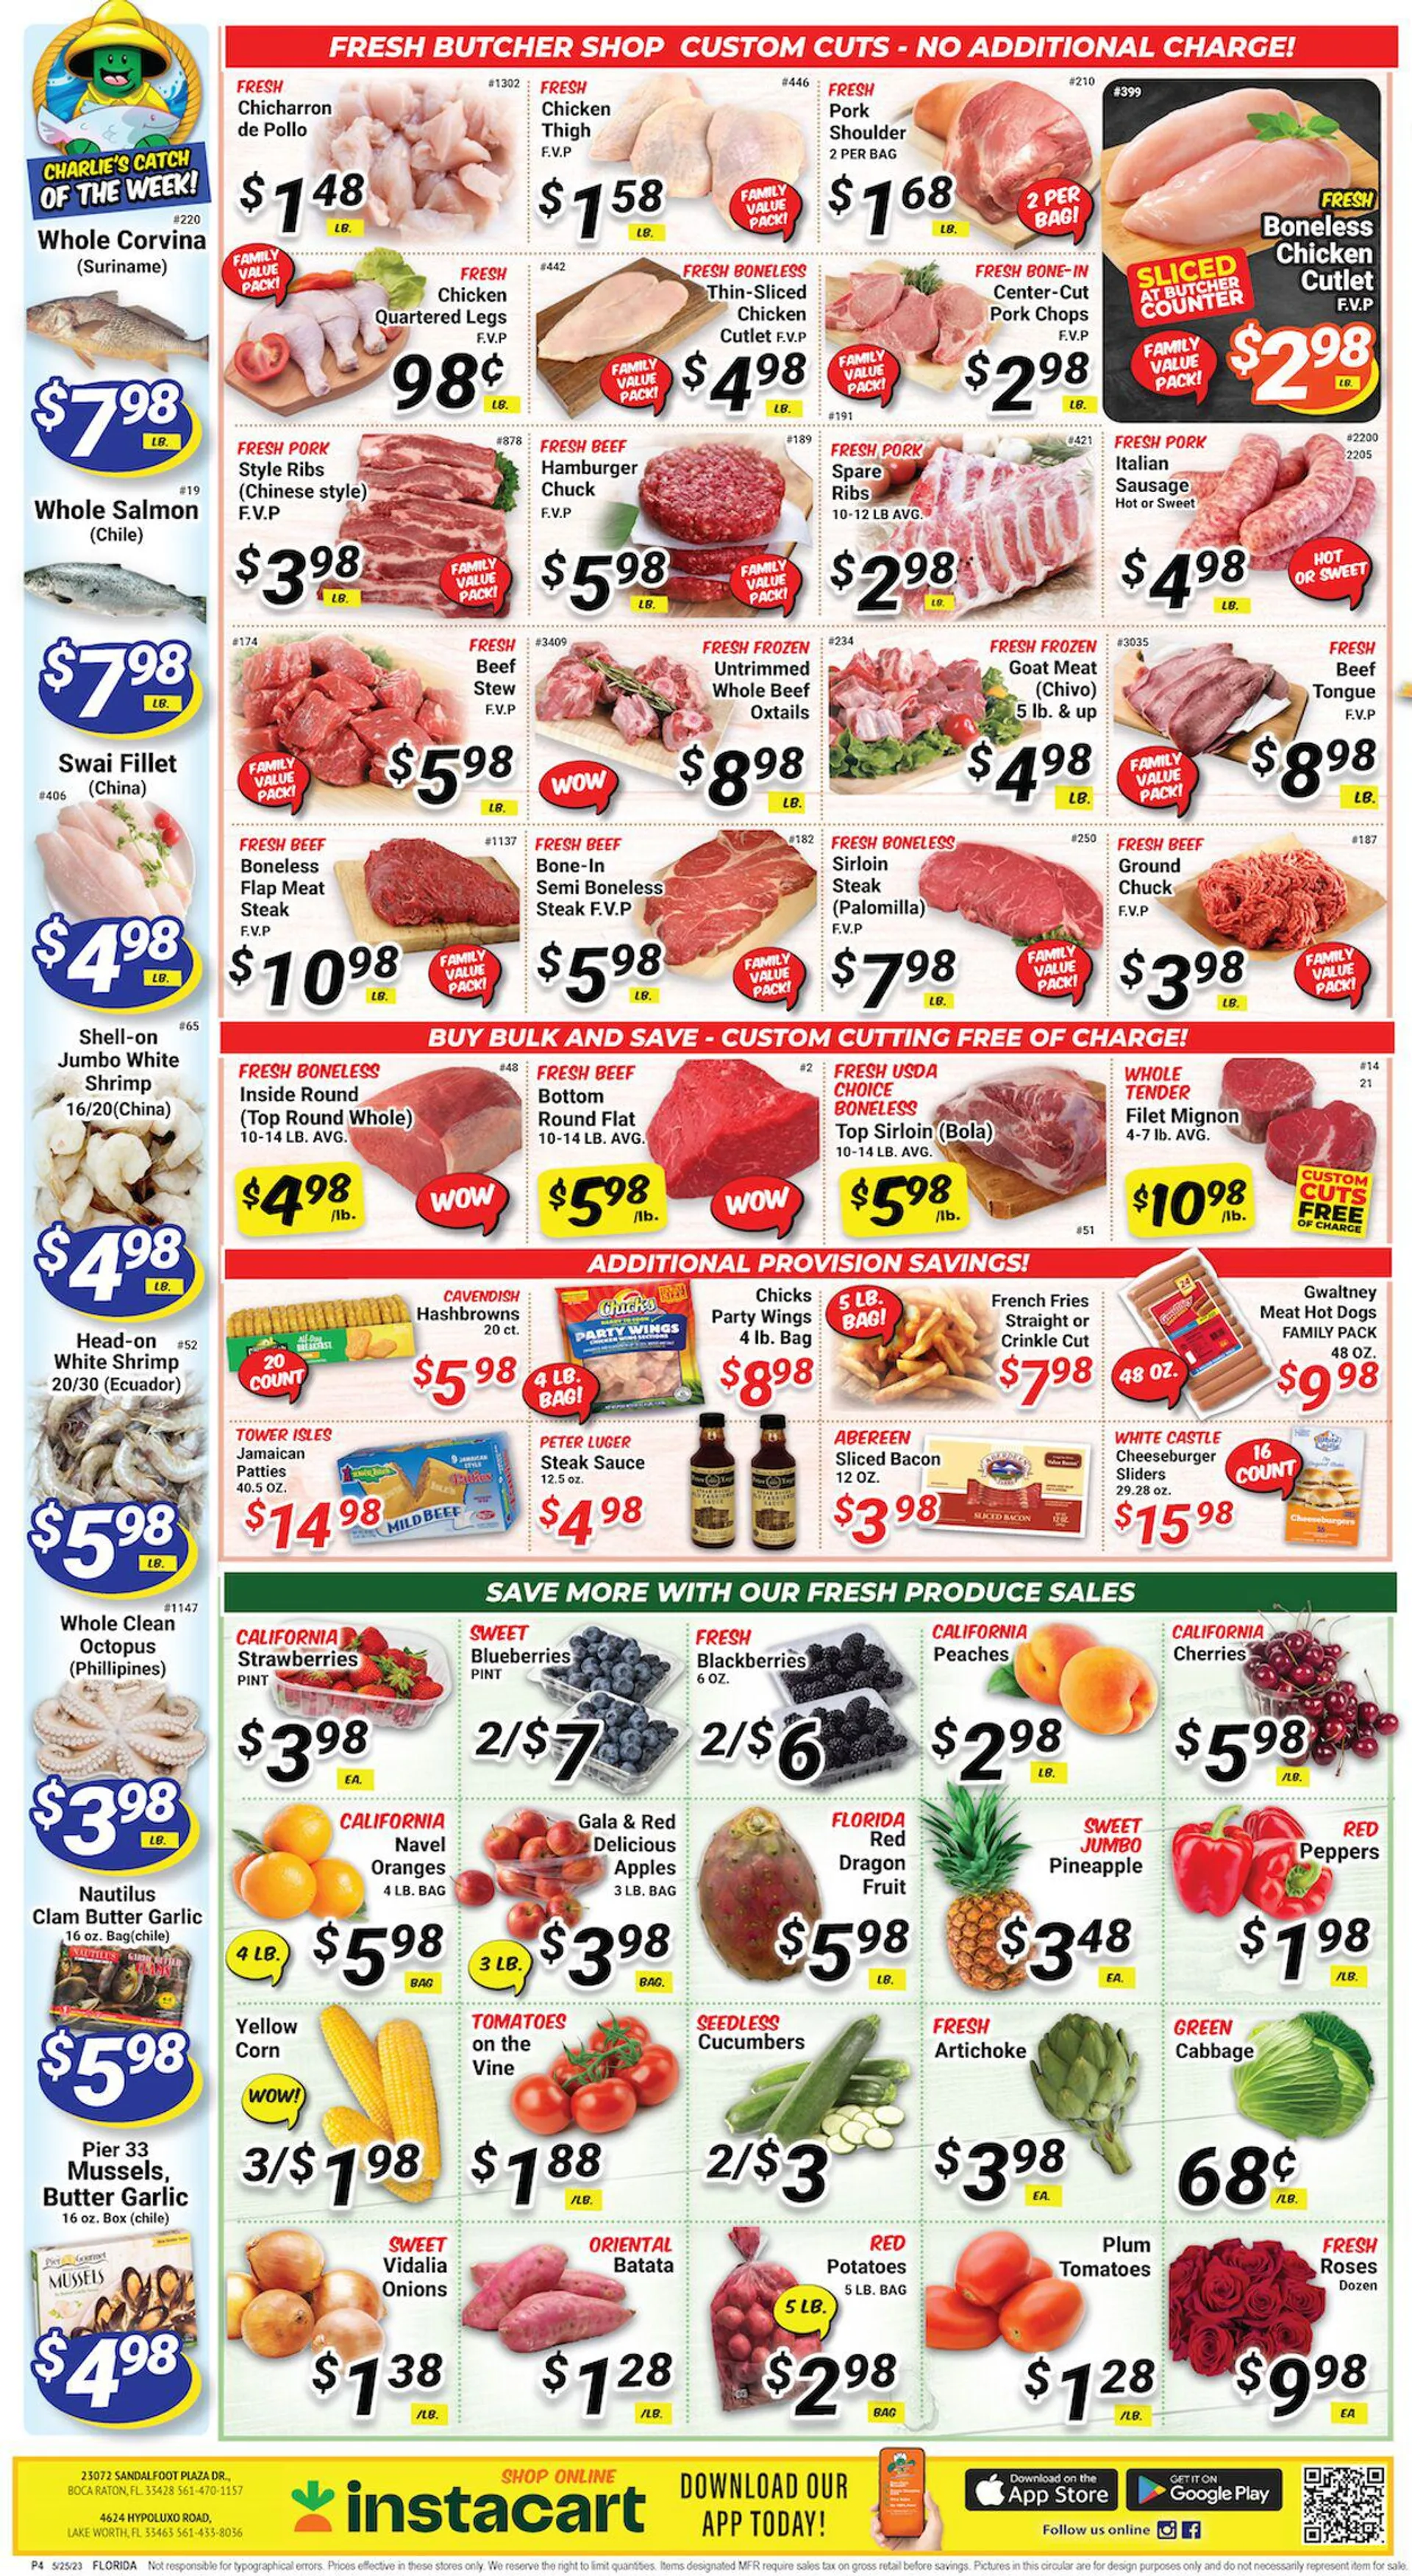 Western Beef Current weekly ad - 2